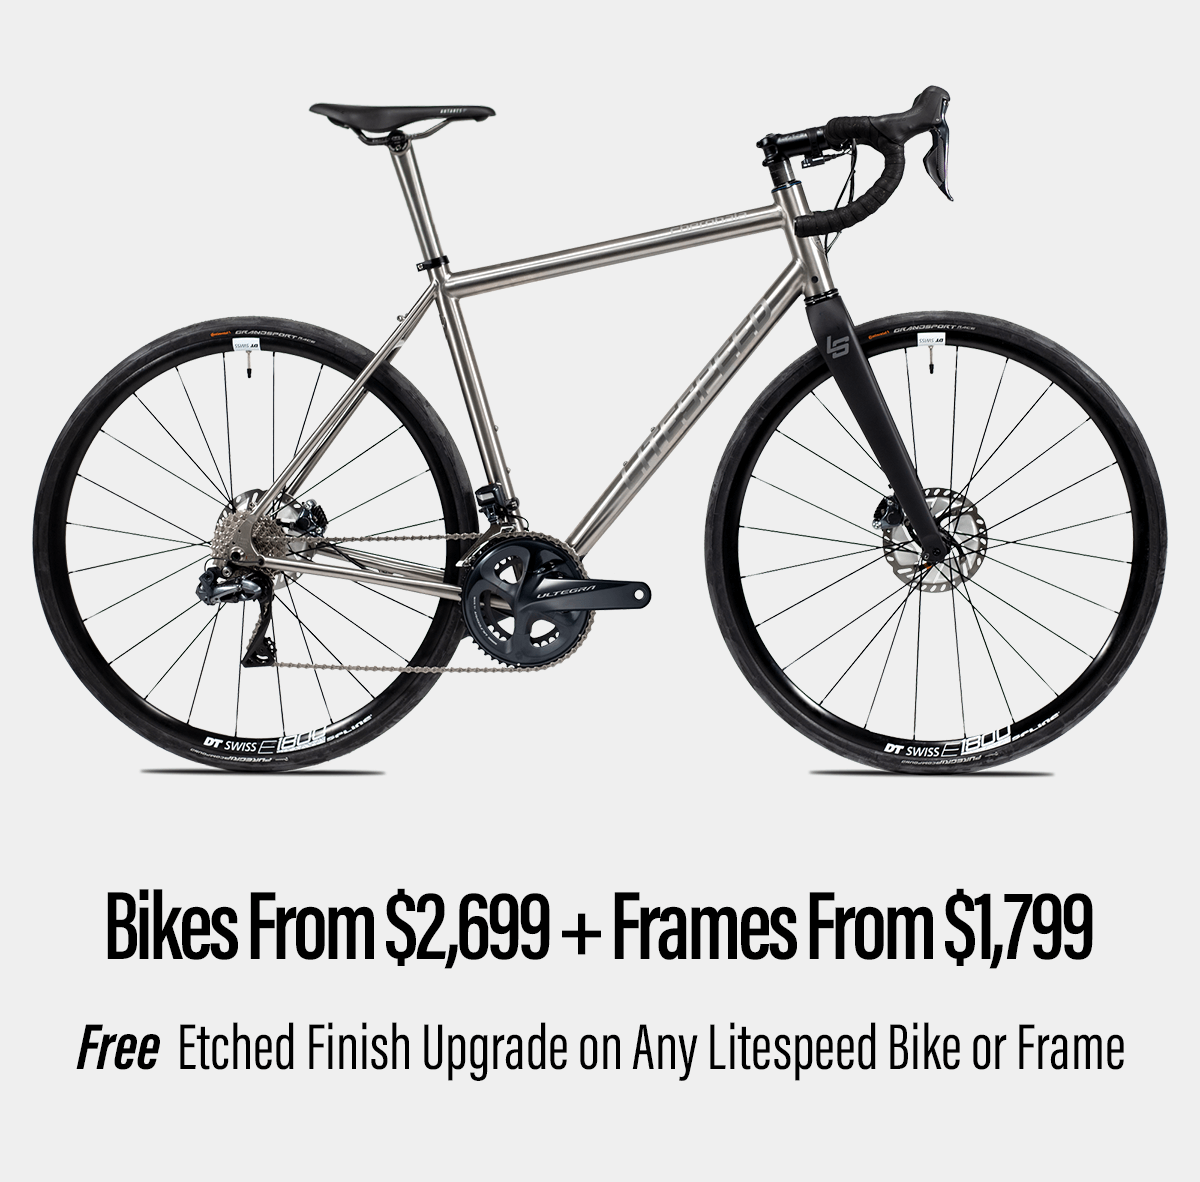 Shop Litespeed bikes from $2,699 and frames from $1,799